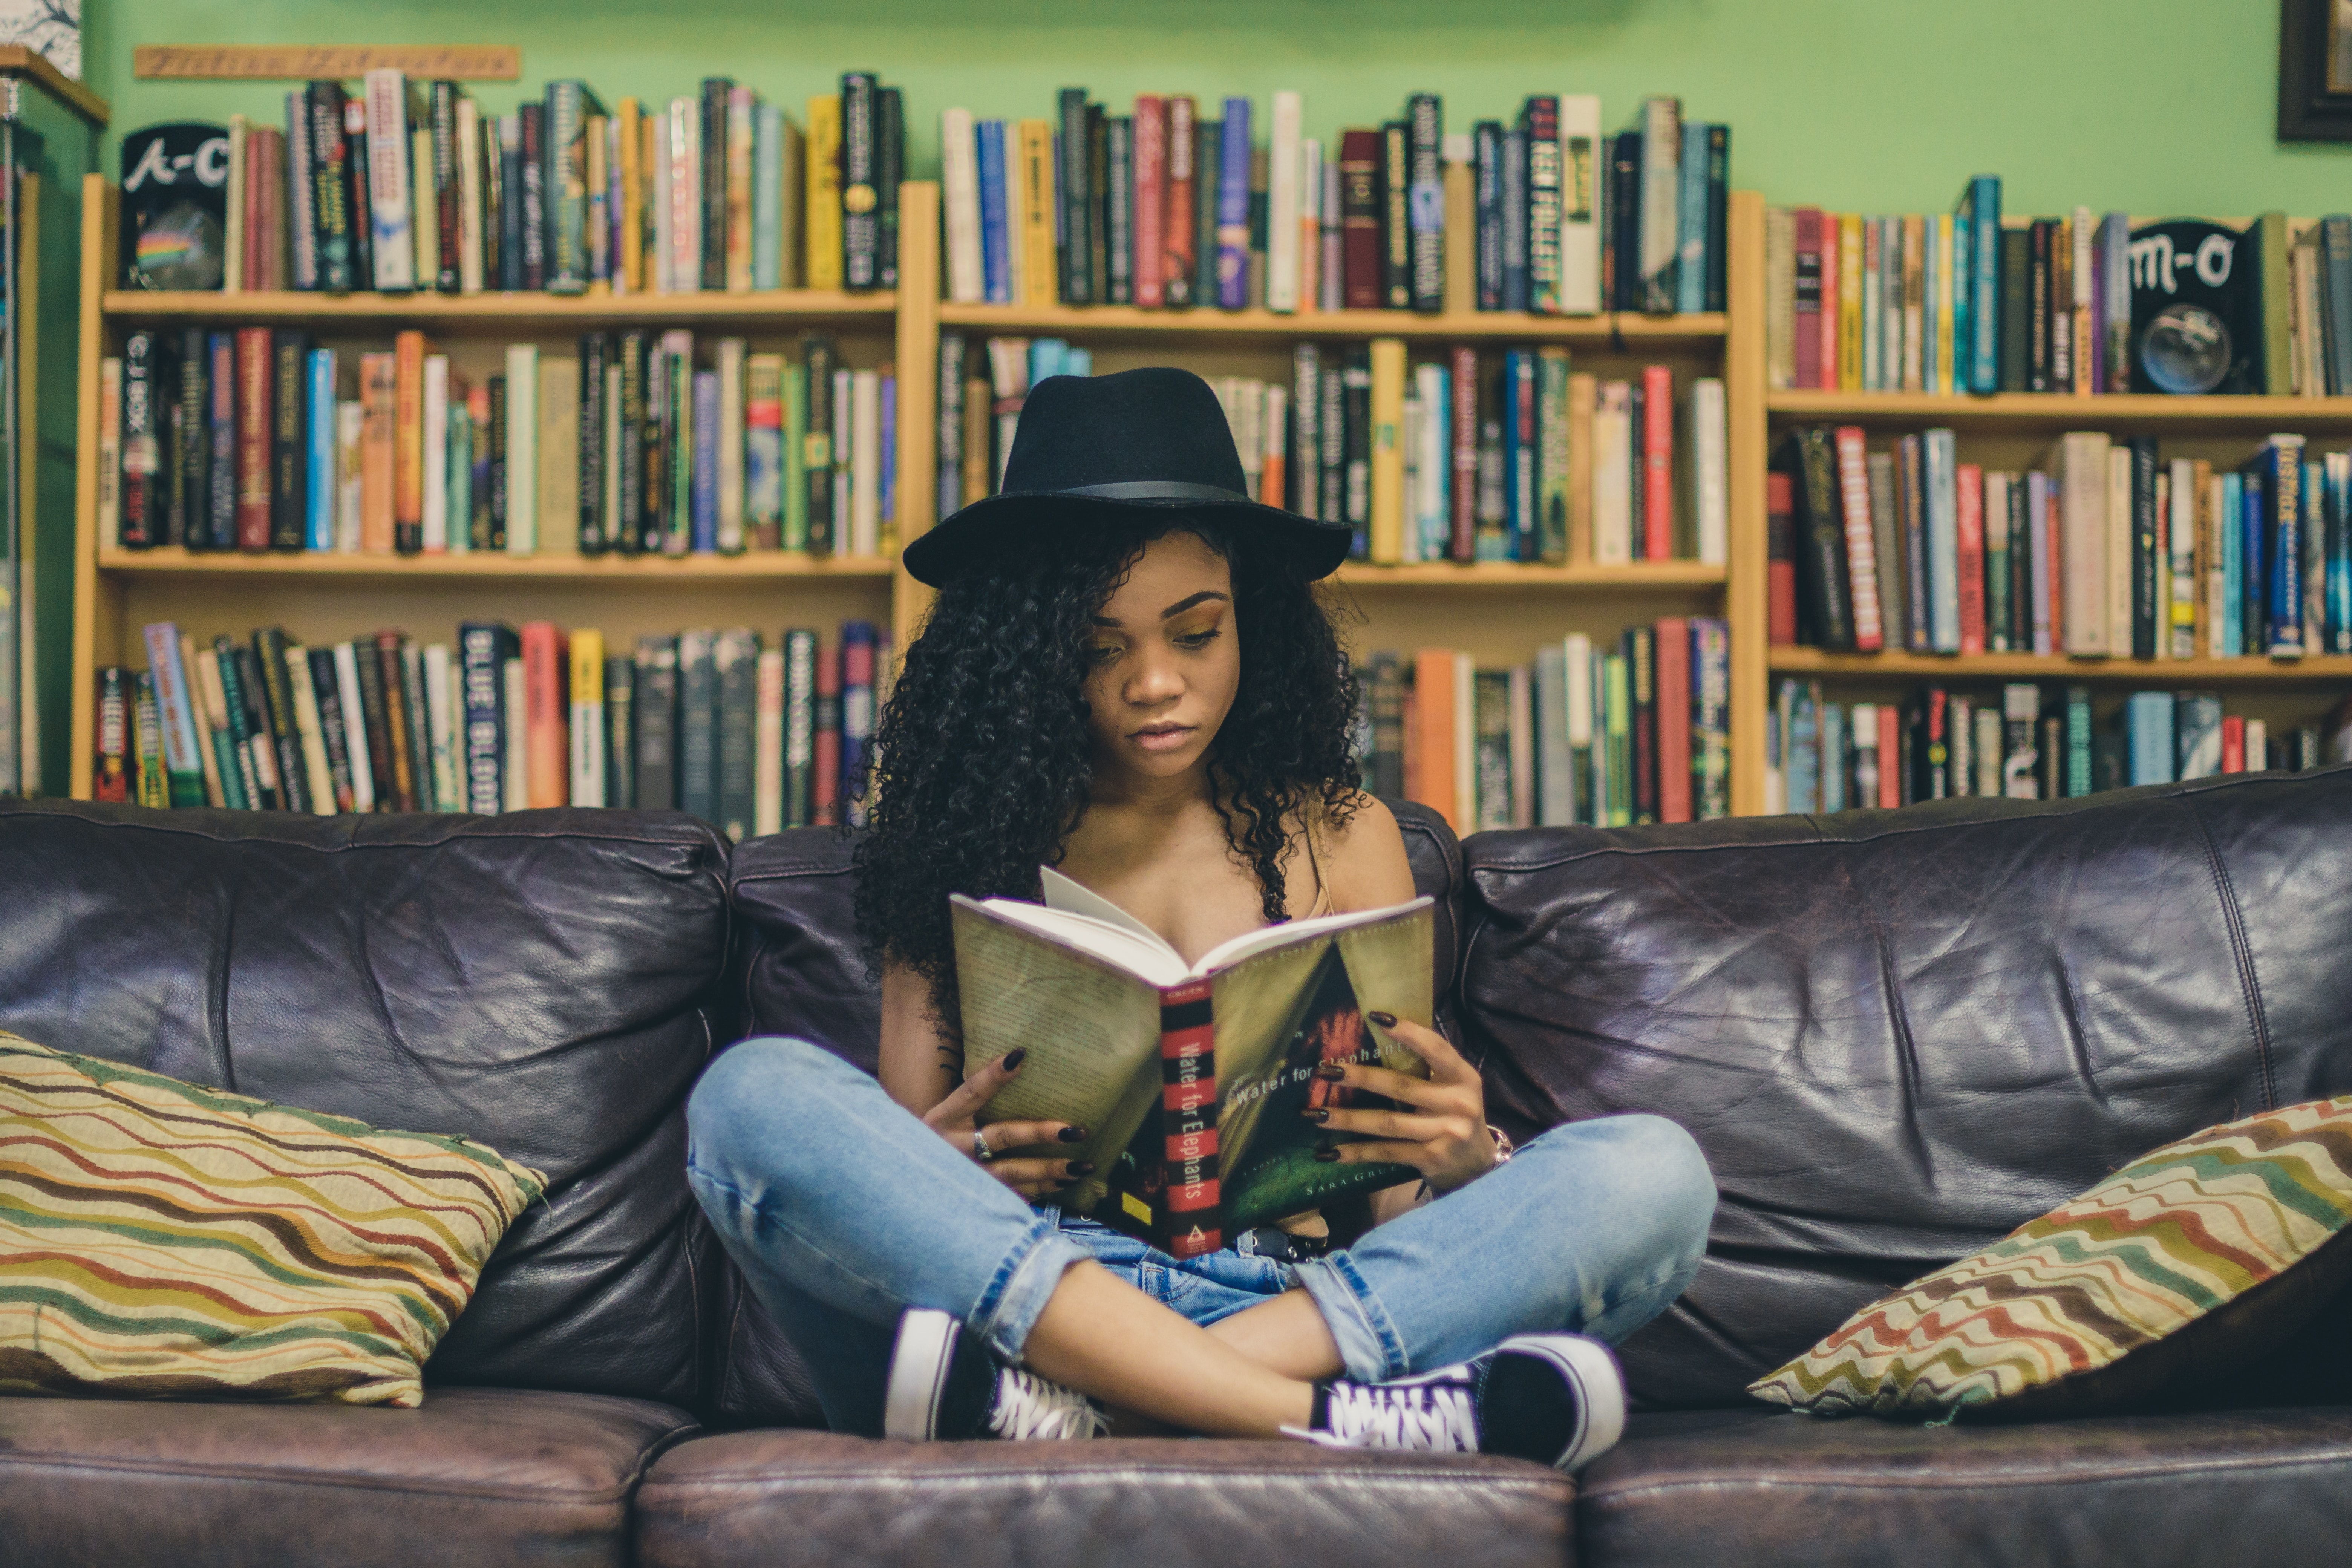 A person sits on a couch reading a book.